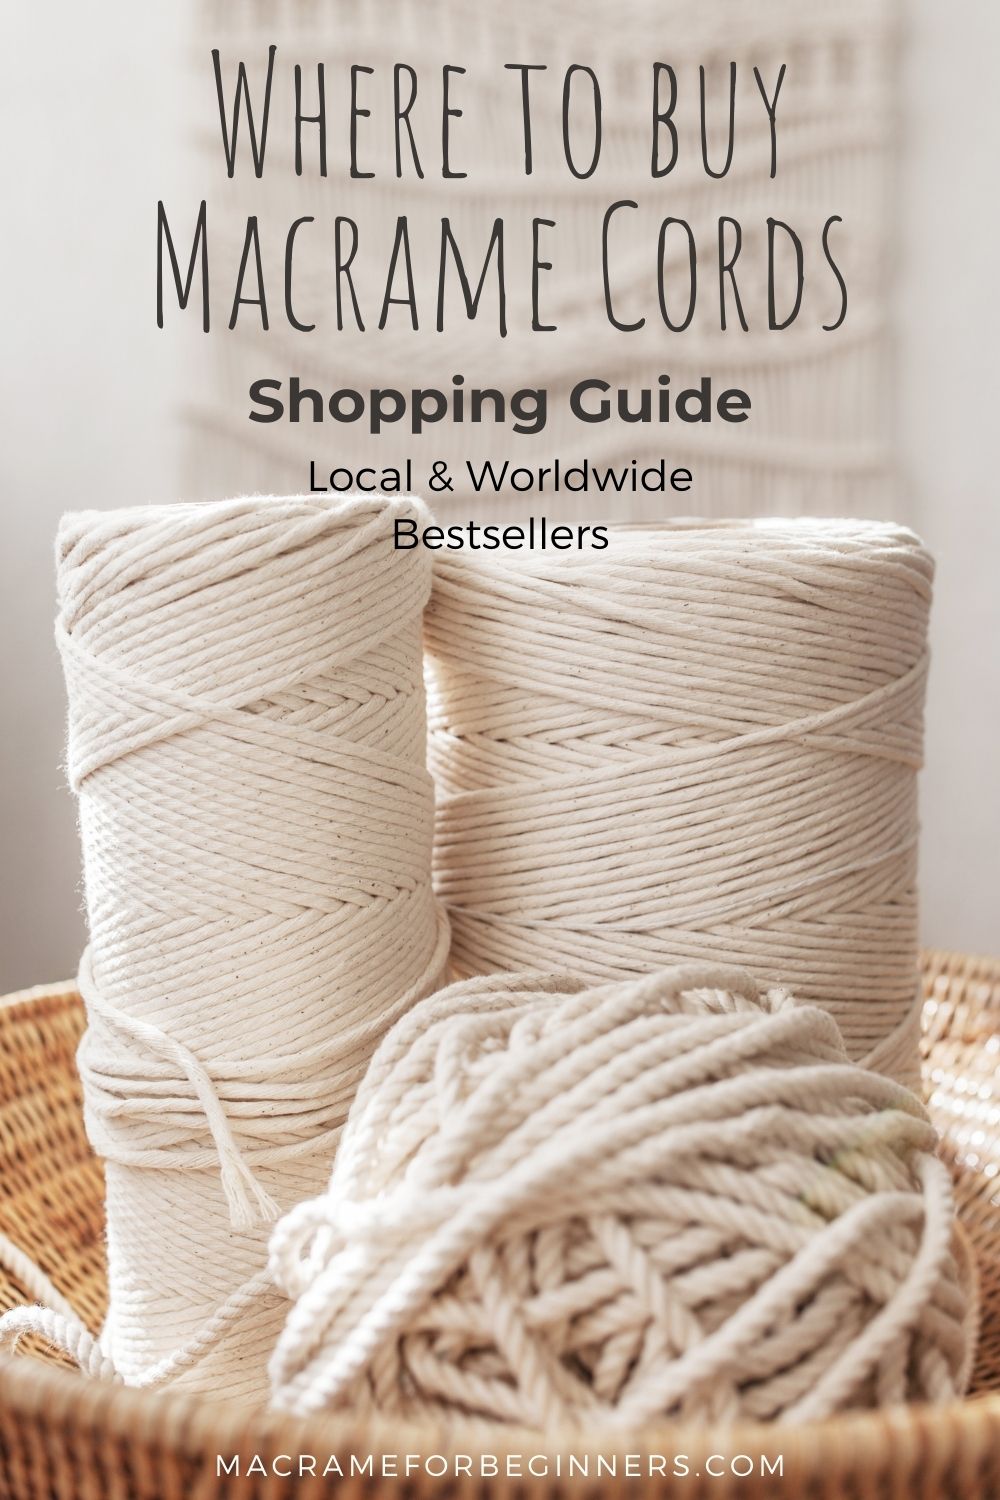 Where to buy Macrame Cords - Shopping Guide with Local and Worldwide Bestsellers